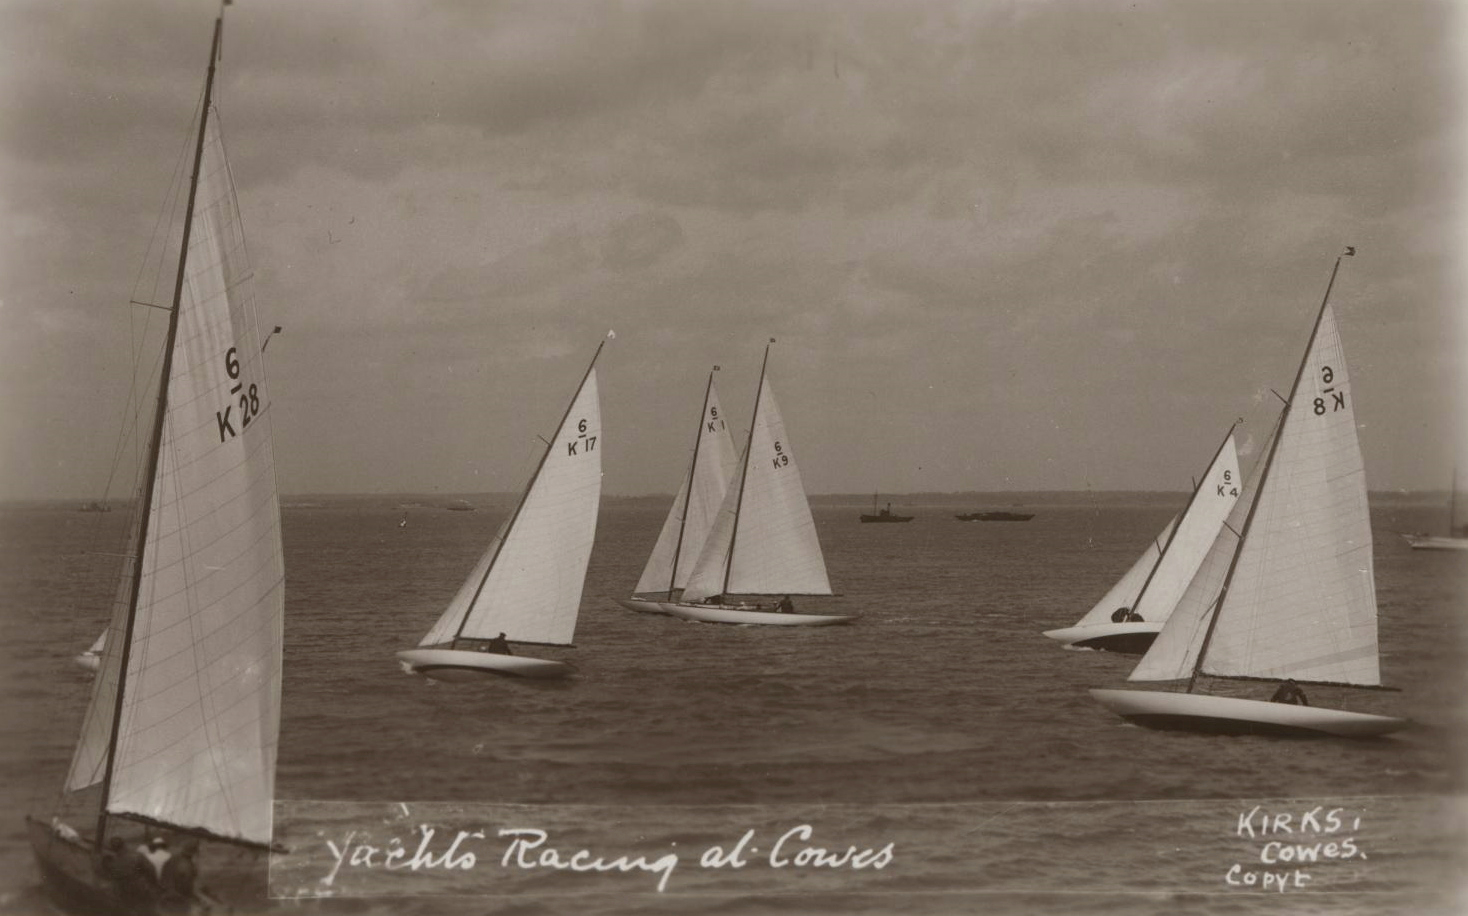 Black and white photograph of racing sailing boats.